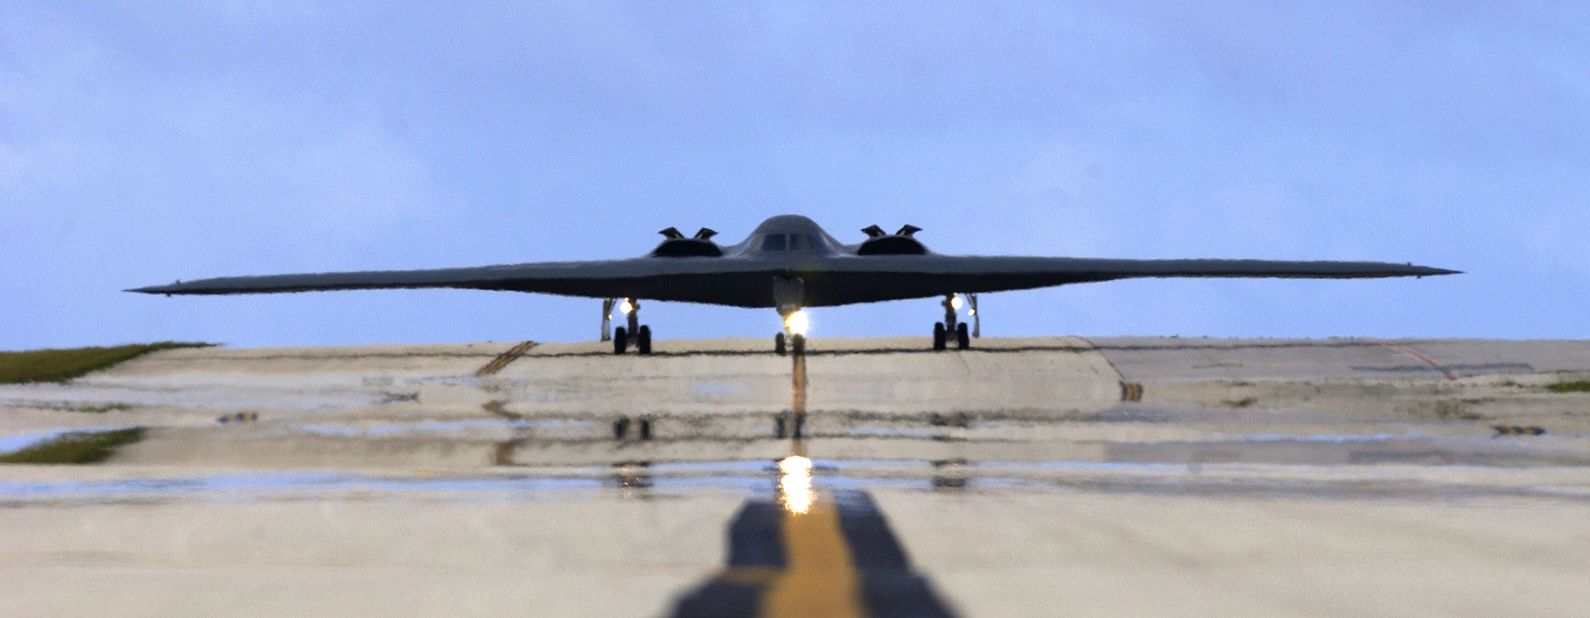 All B-2s are named after a US state and are among the most high maintenance planes in existence, requiring tens of hours of servicing for each hour of flight.